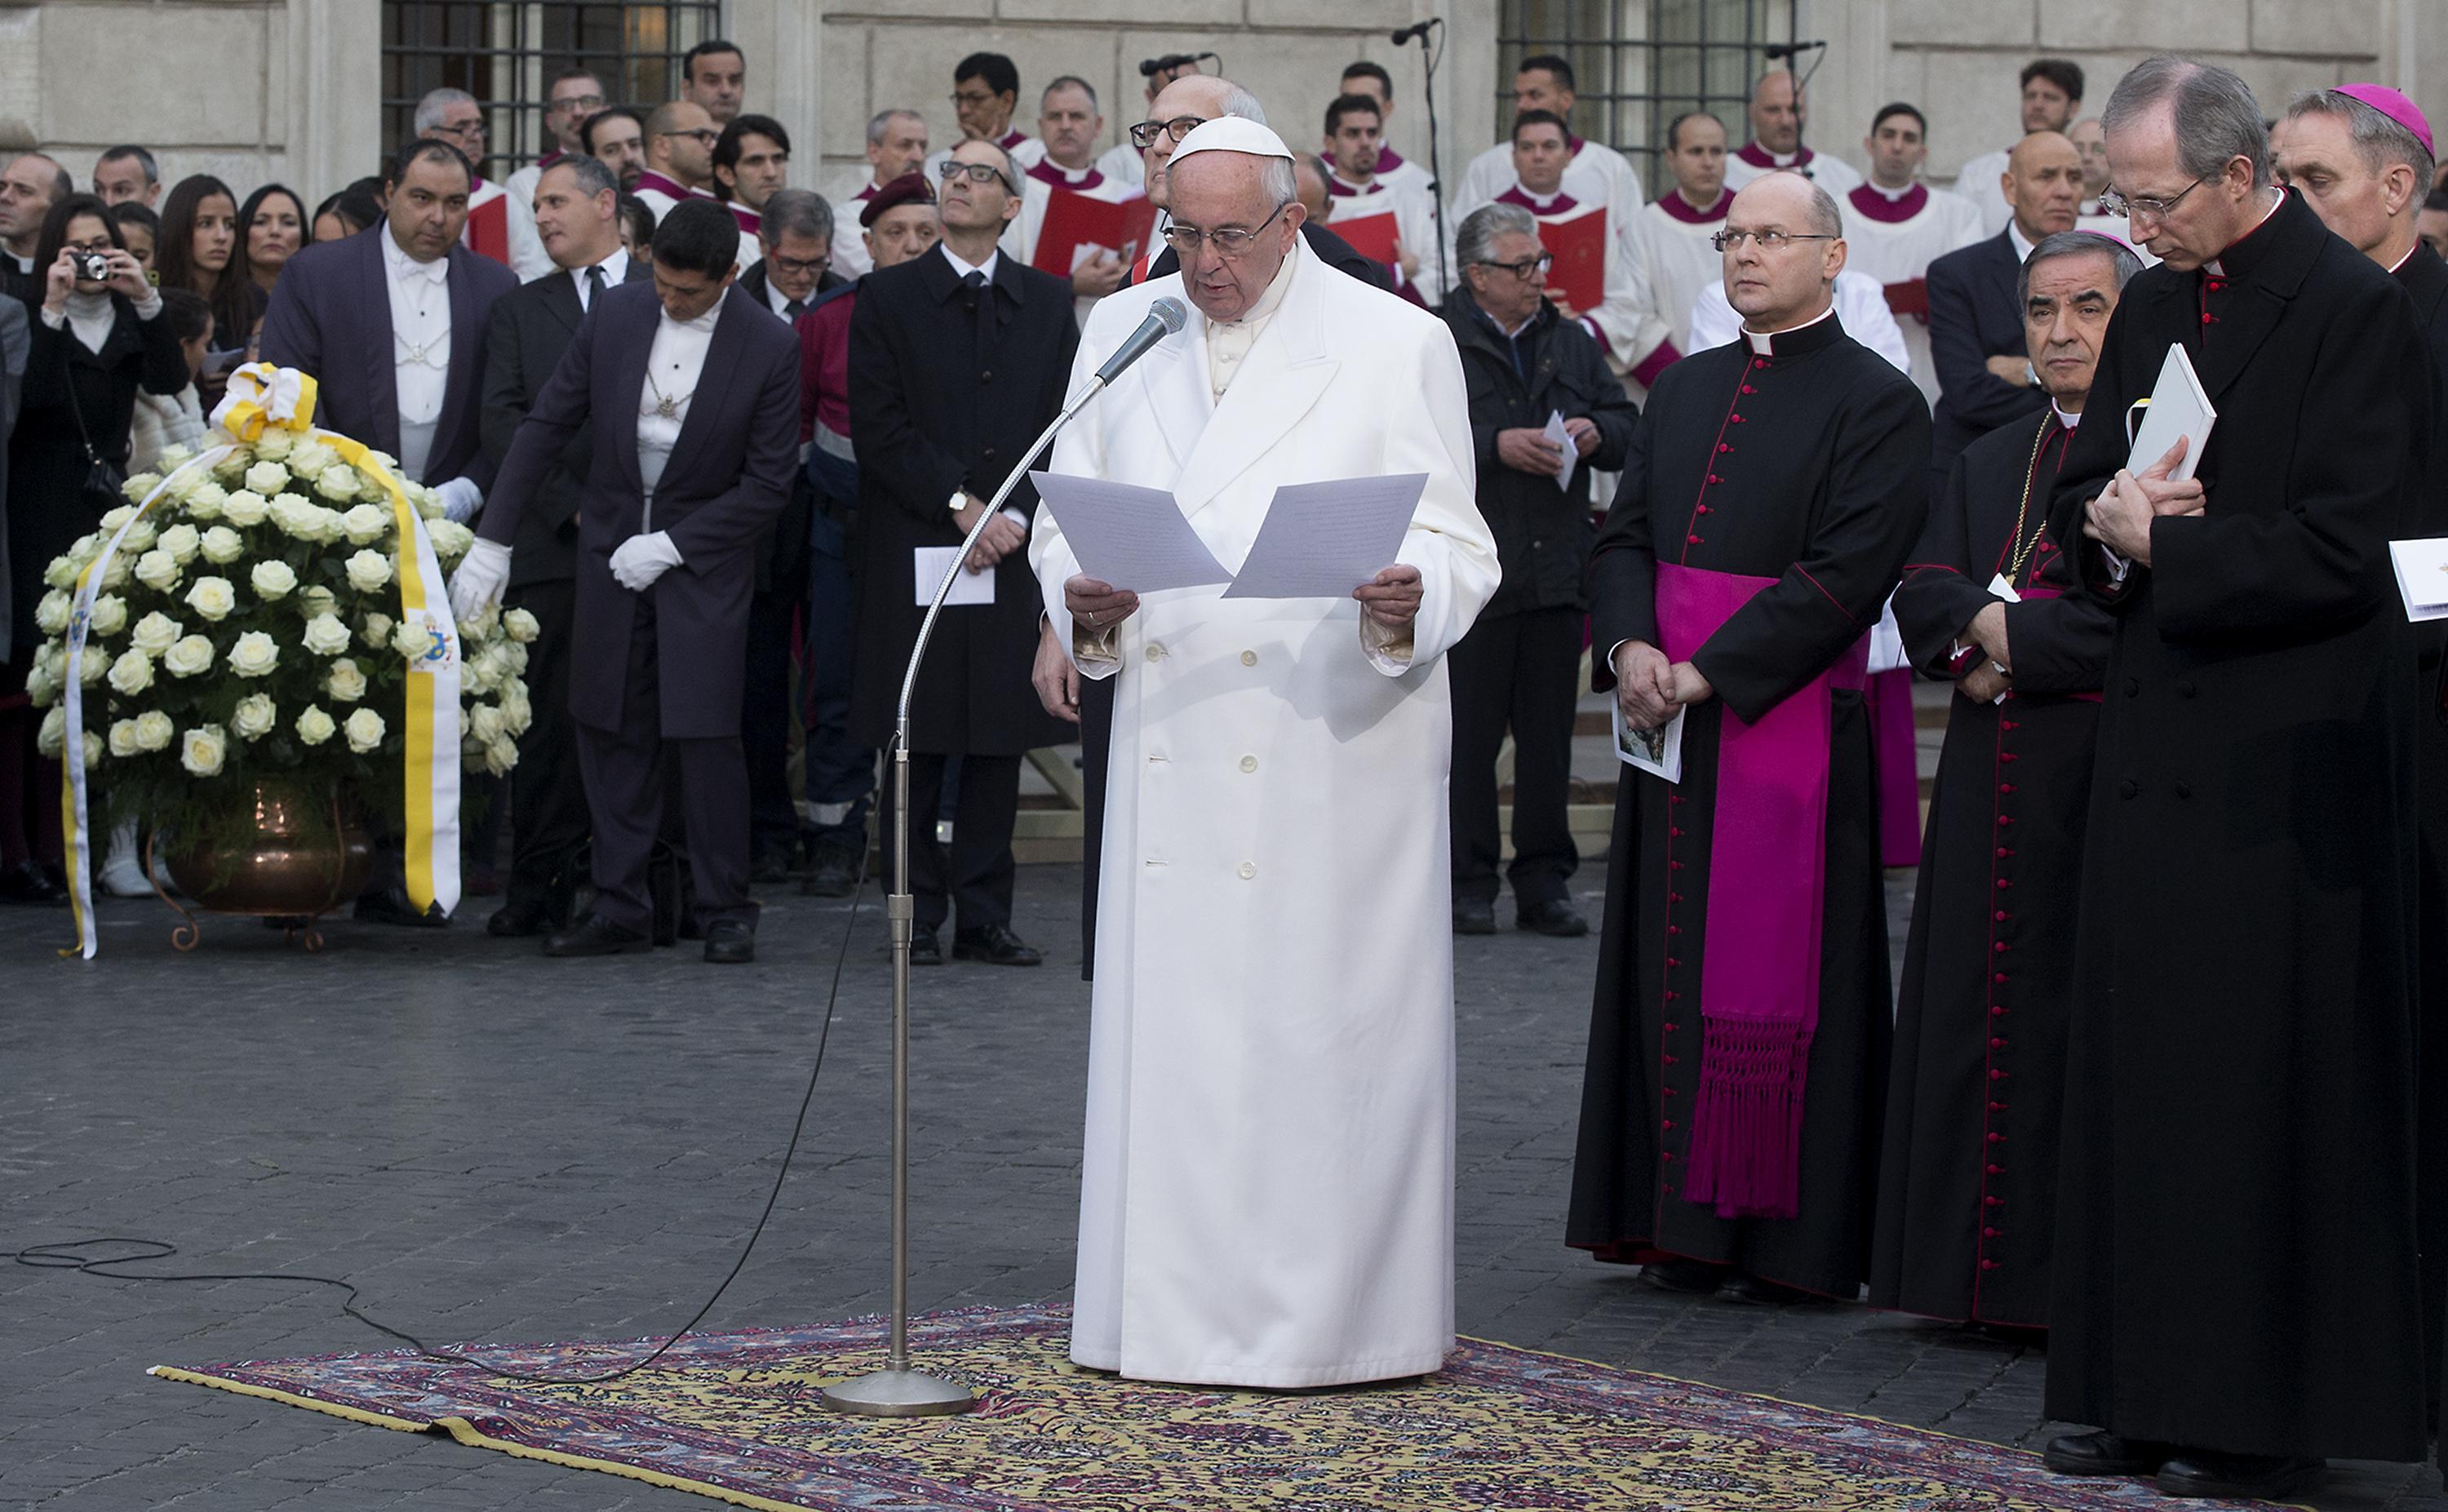 Pope Francis as he leads a prayer at the statue of Virgin Mary during the annual feast of the Immaculate Conception at Piazza Mignanelli in Rome